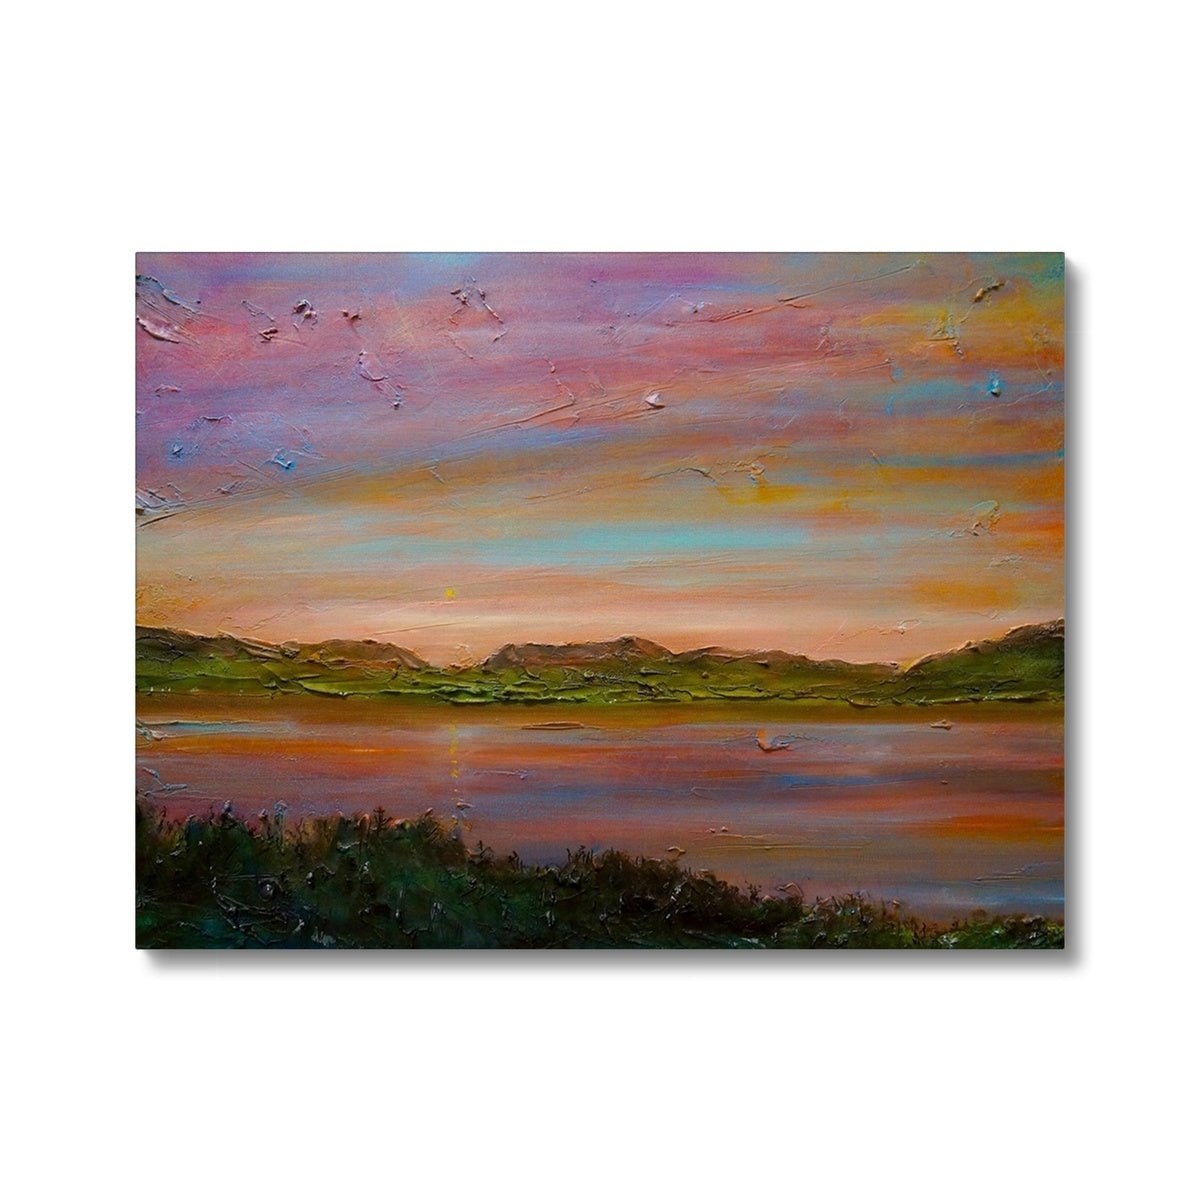 Gourock Golf Club Sunset Painting | Canvas From Scotland-Contemporary Stretched Canvas Prints-River Clyde Art Gallery-24"x18"-Paintings, Prints, Homeware, Art Gifts From Scotland By Scottish Artist Kevin Hunter